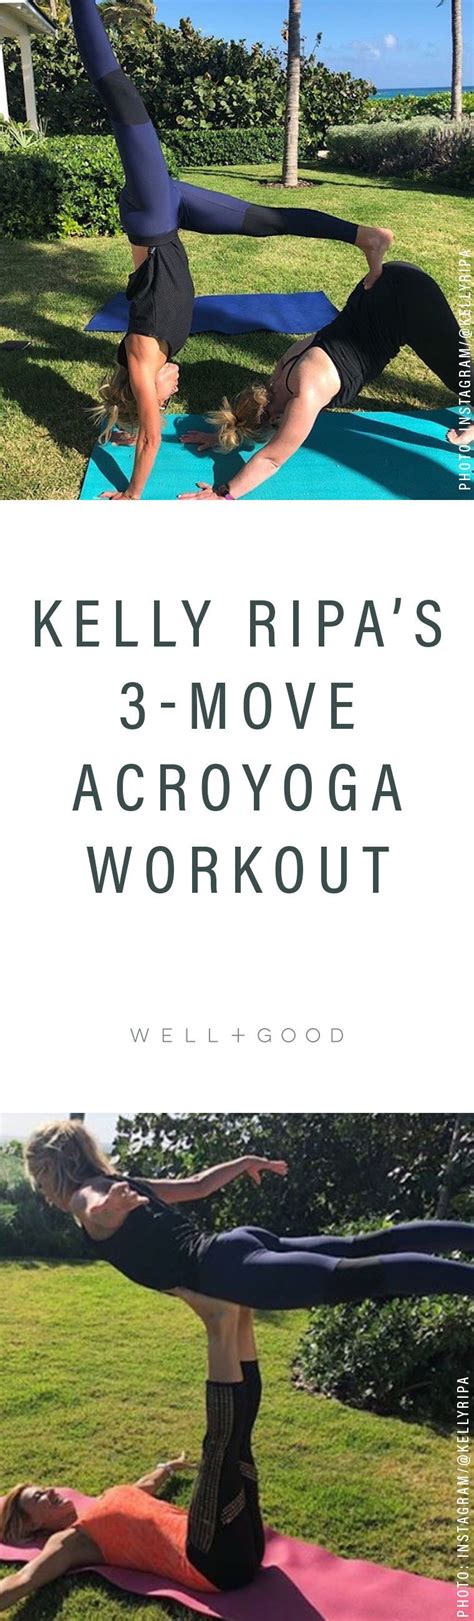 Kelly Ripa Acroyoga Partner Workout Workout Moves Butt Workout Daily